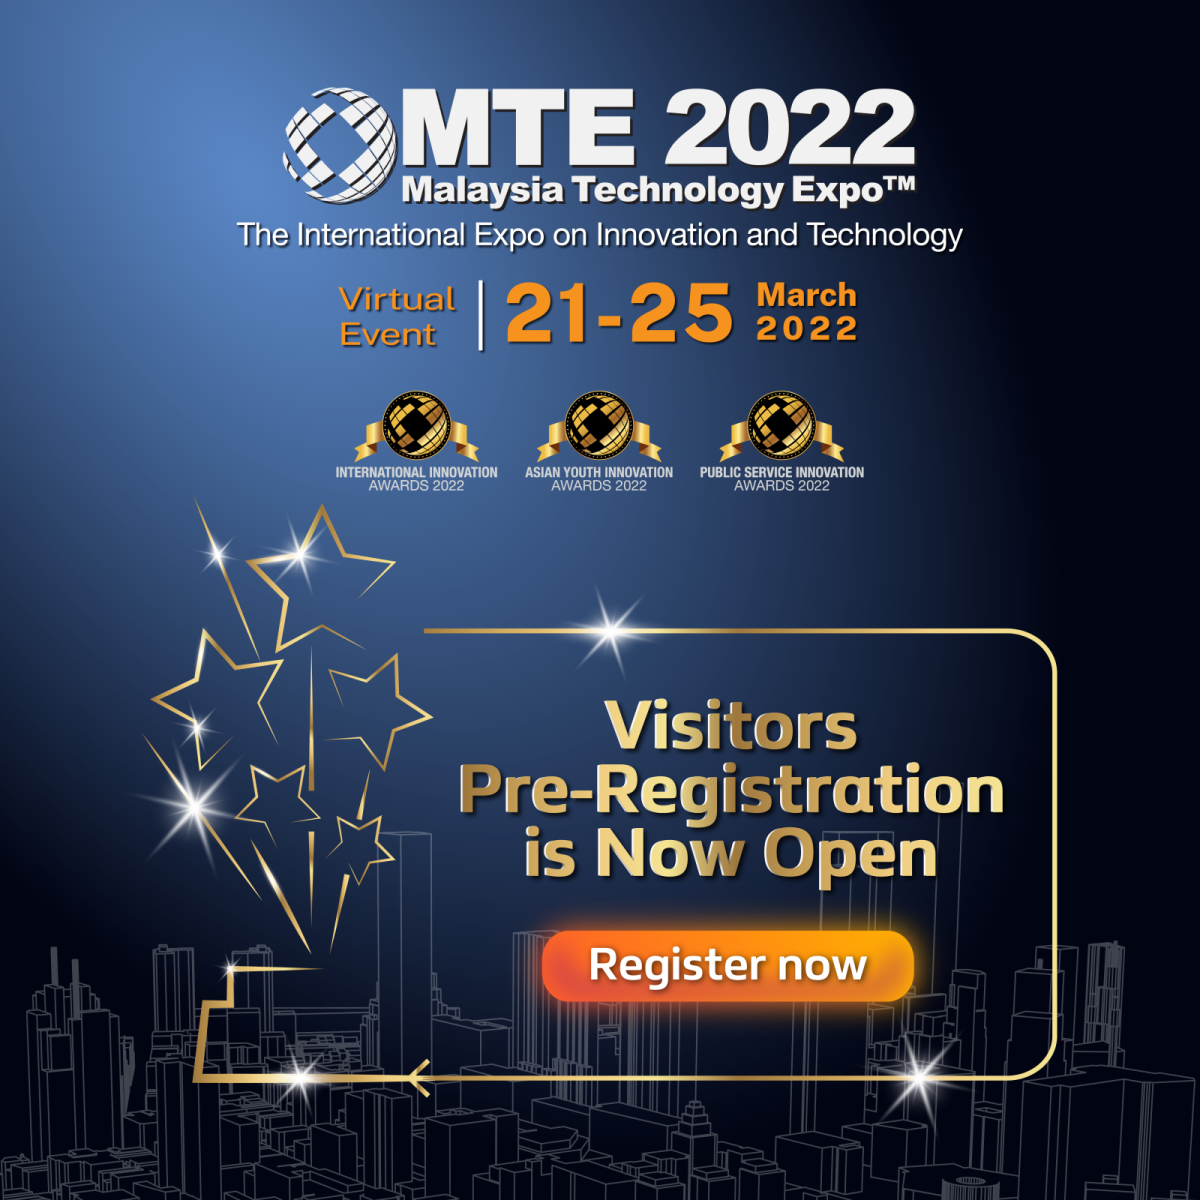 The countdown is on till MTE 2022!